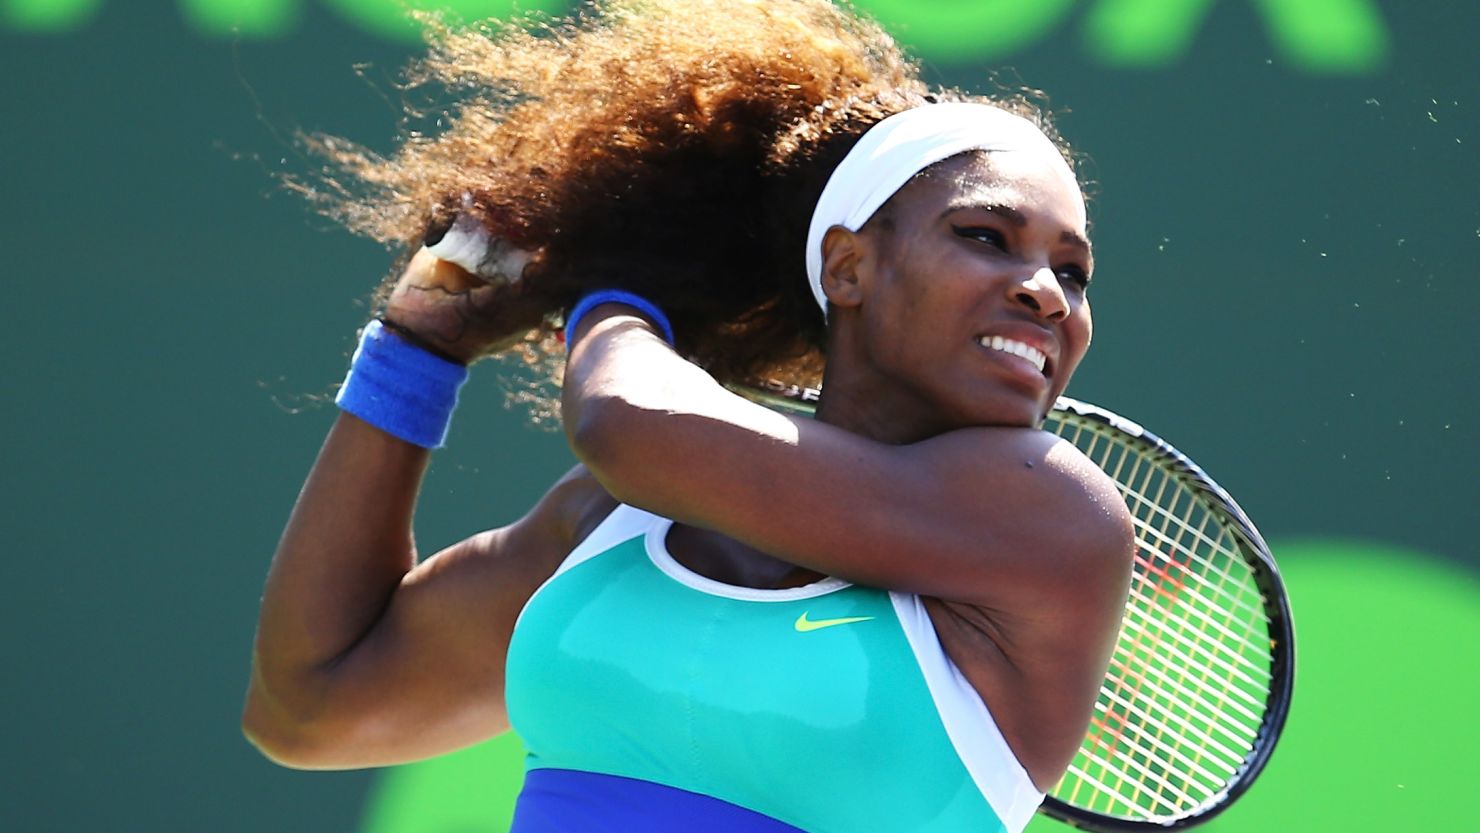 Serena Williams is the No. 1 seed in Miami and has won the tournament on five occasions.